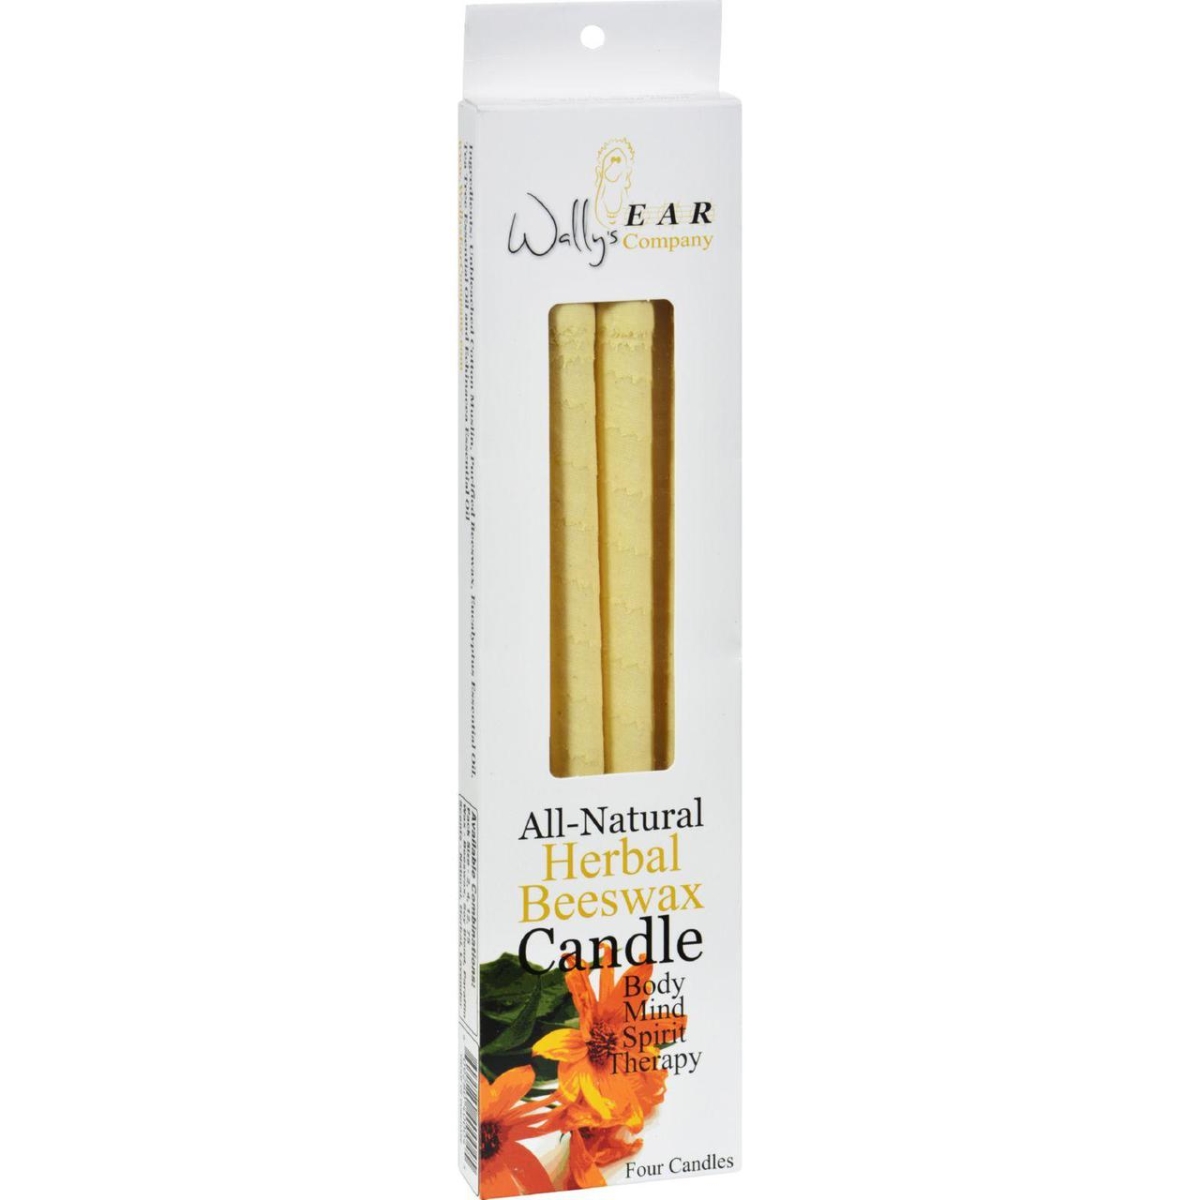 Hg0115964 Ear Candles Herbal Beeswax - 4 Candles